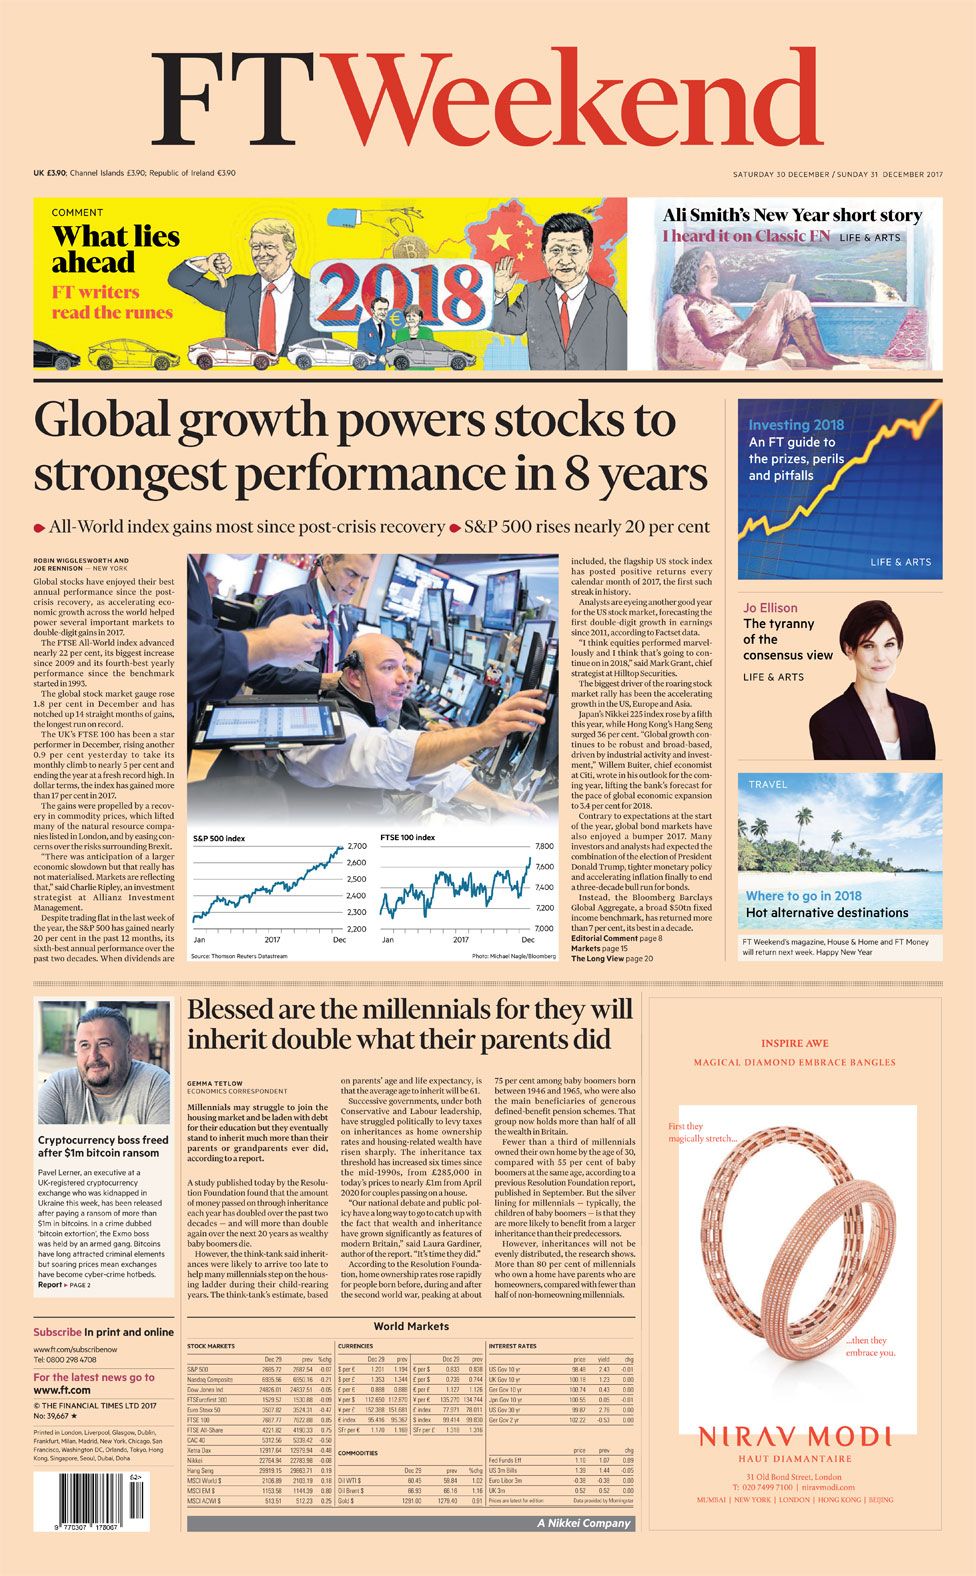 The FT